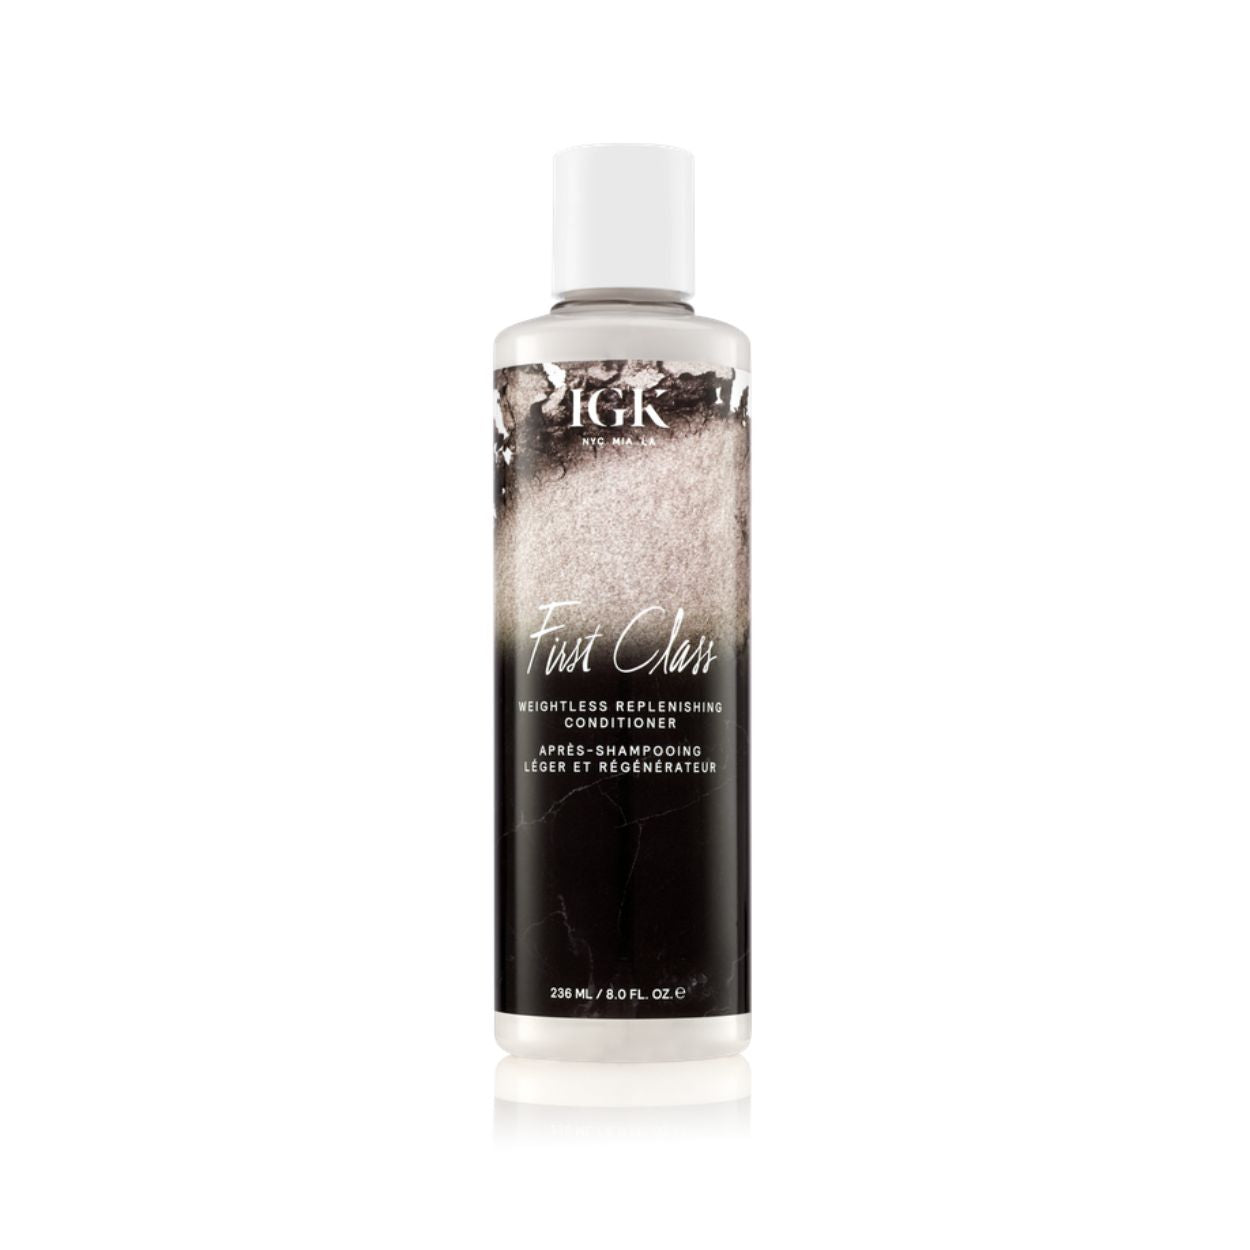 First Class Weightless Replenishing Conditioner